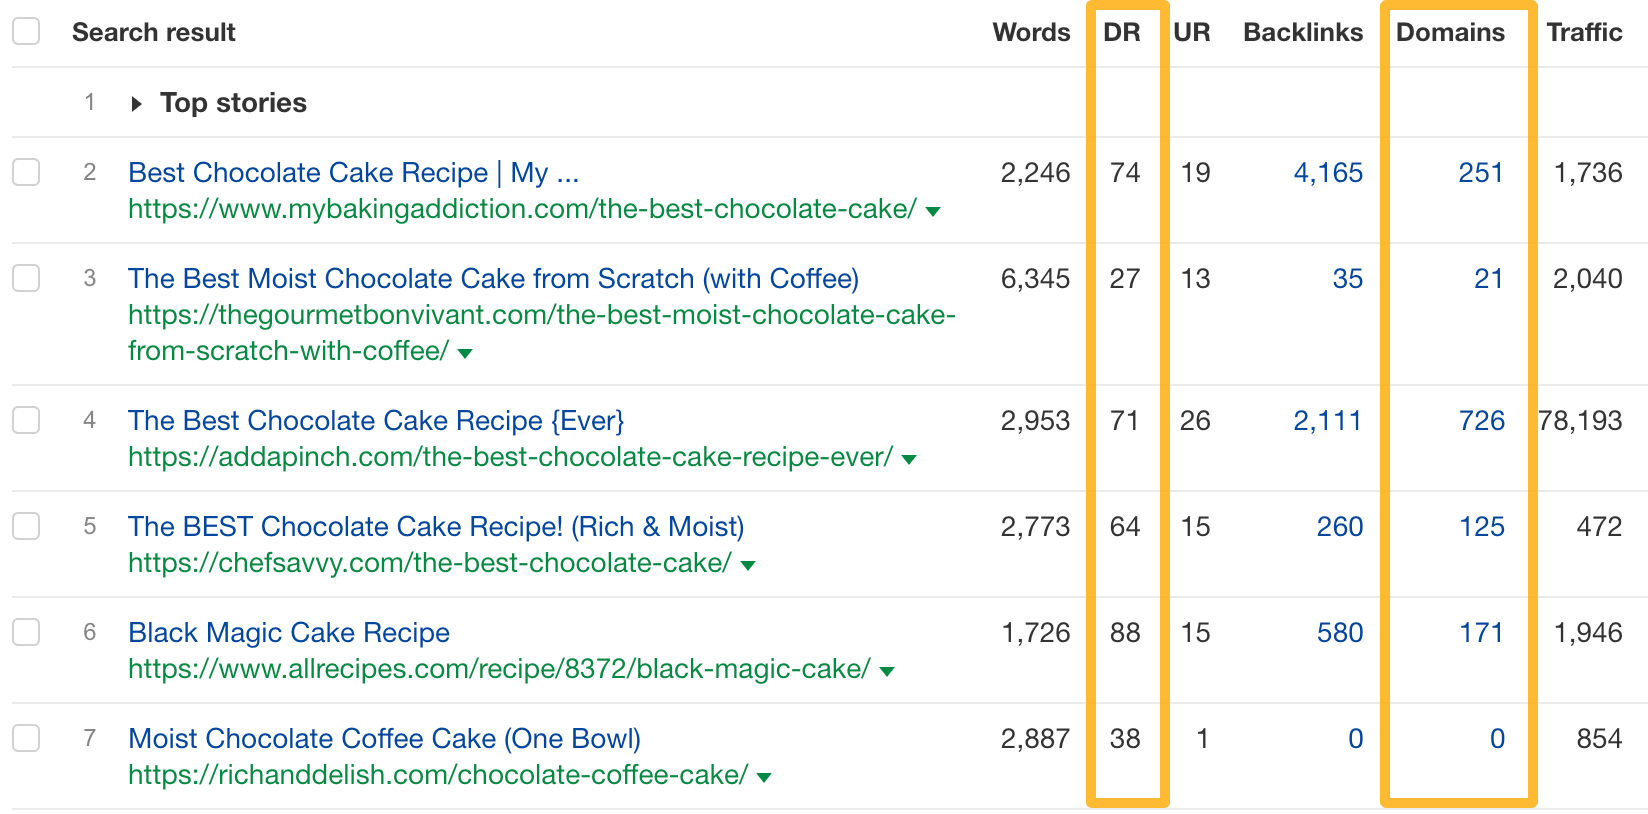 SEO metrics for the top-ranking pages for "best chocolate cake recipe with coffee"
